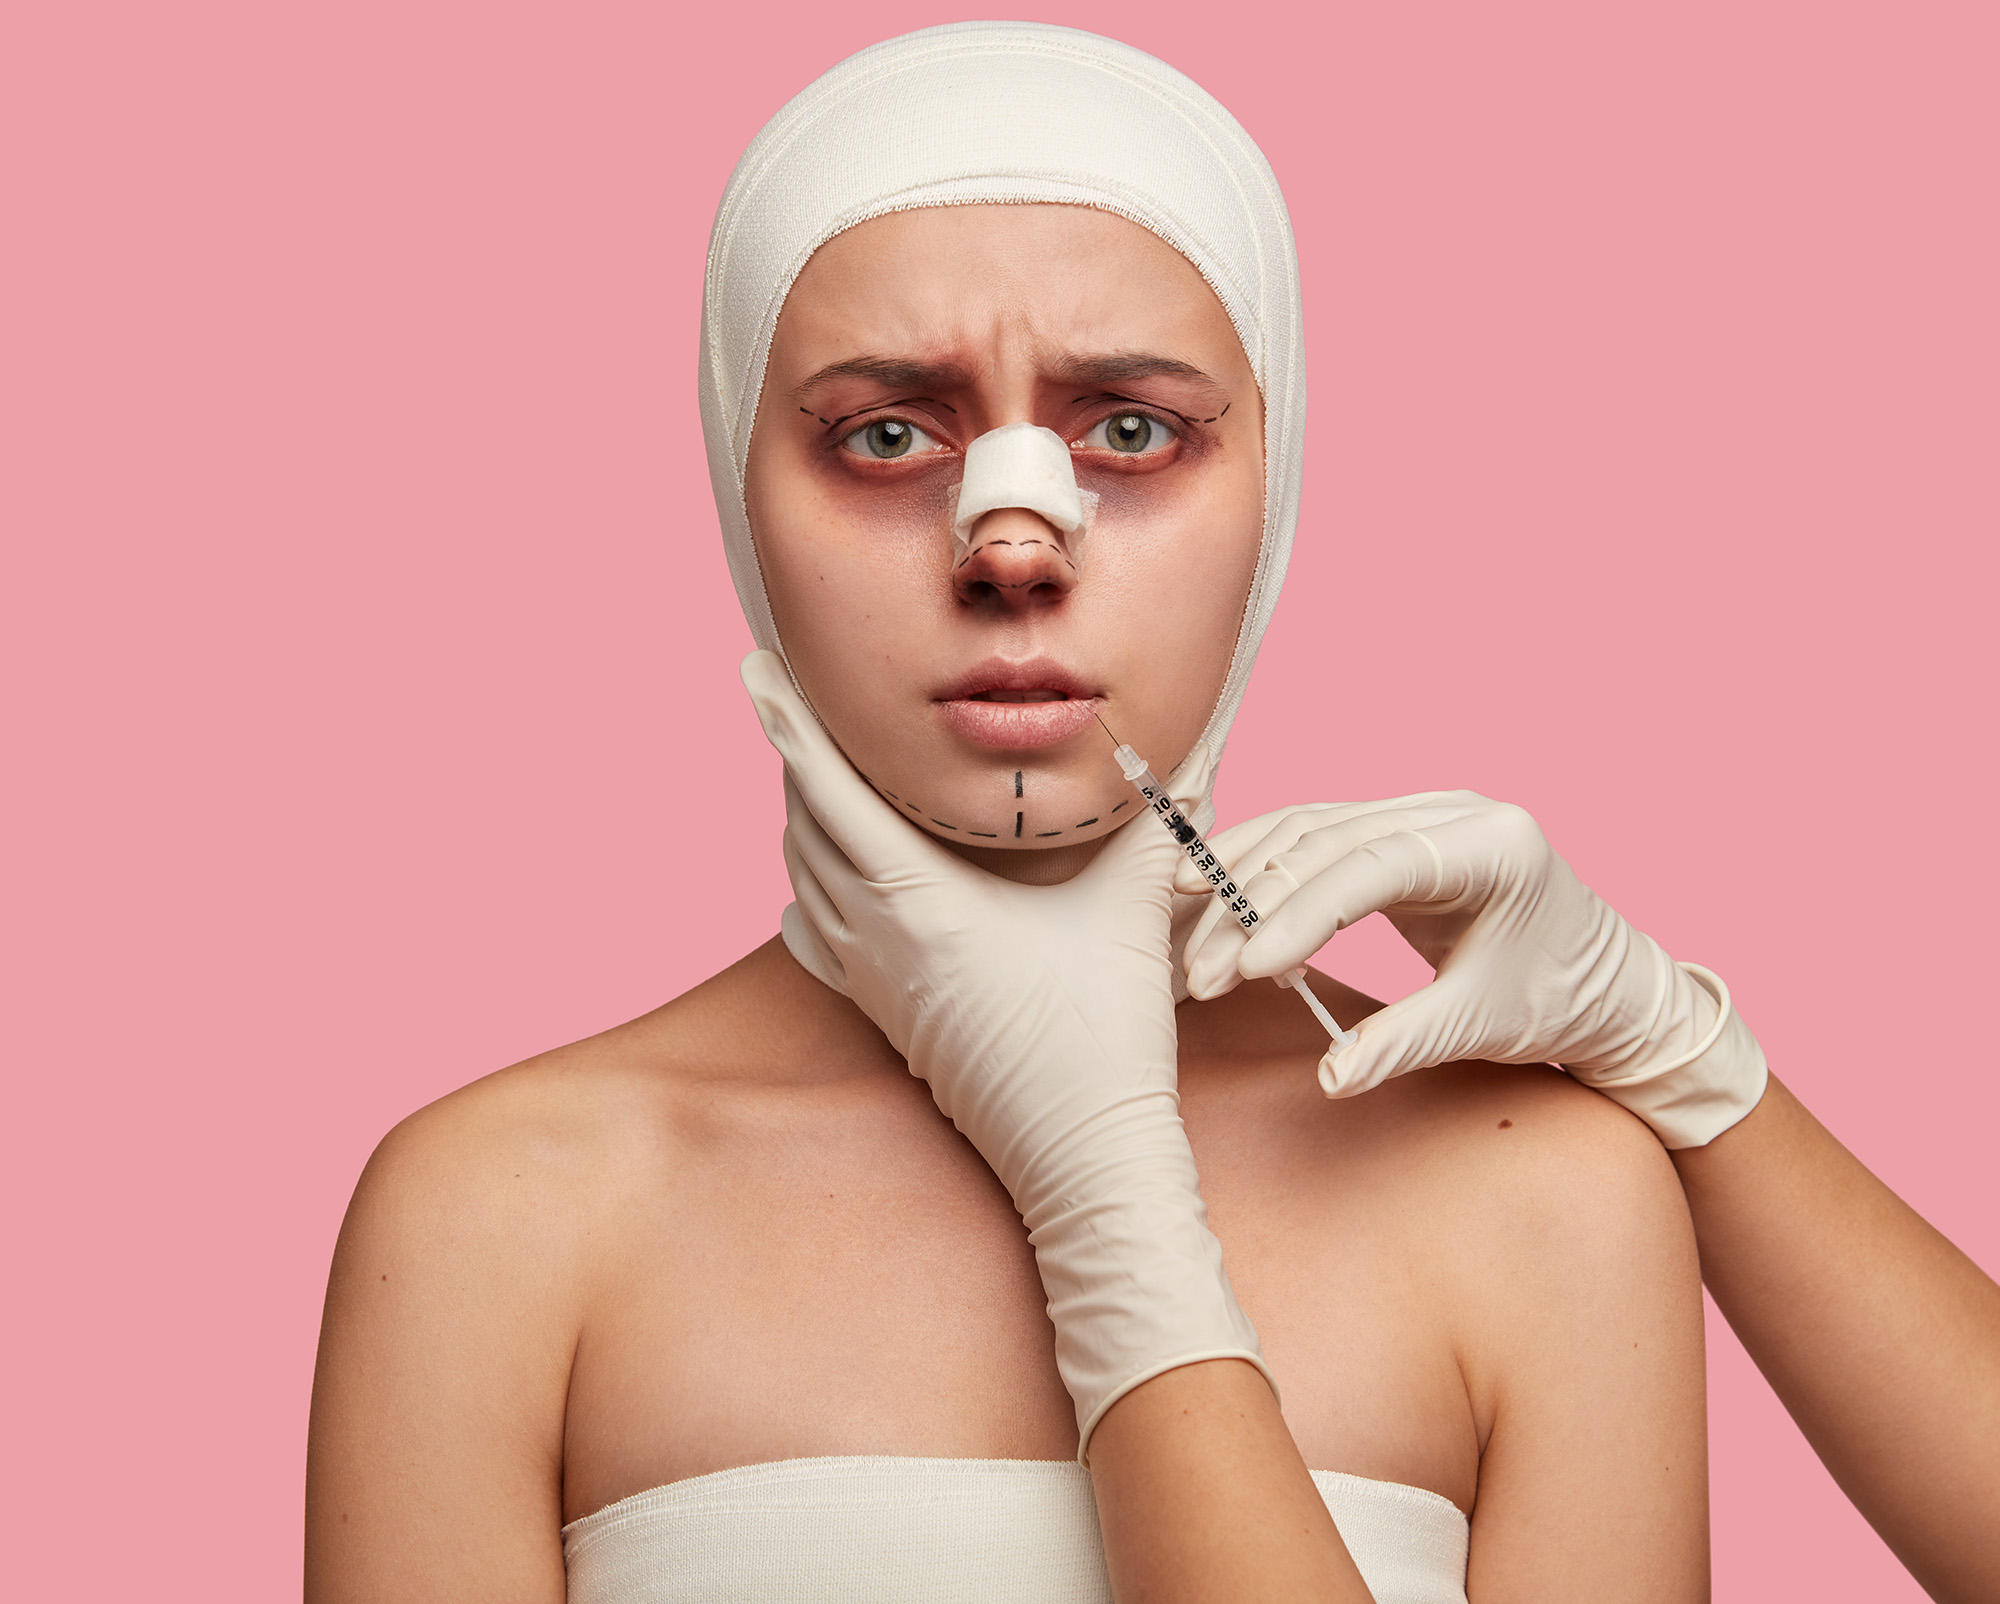 negligent cosmetic surgery medical negligence solicitors Aberdeen